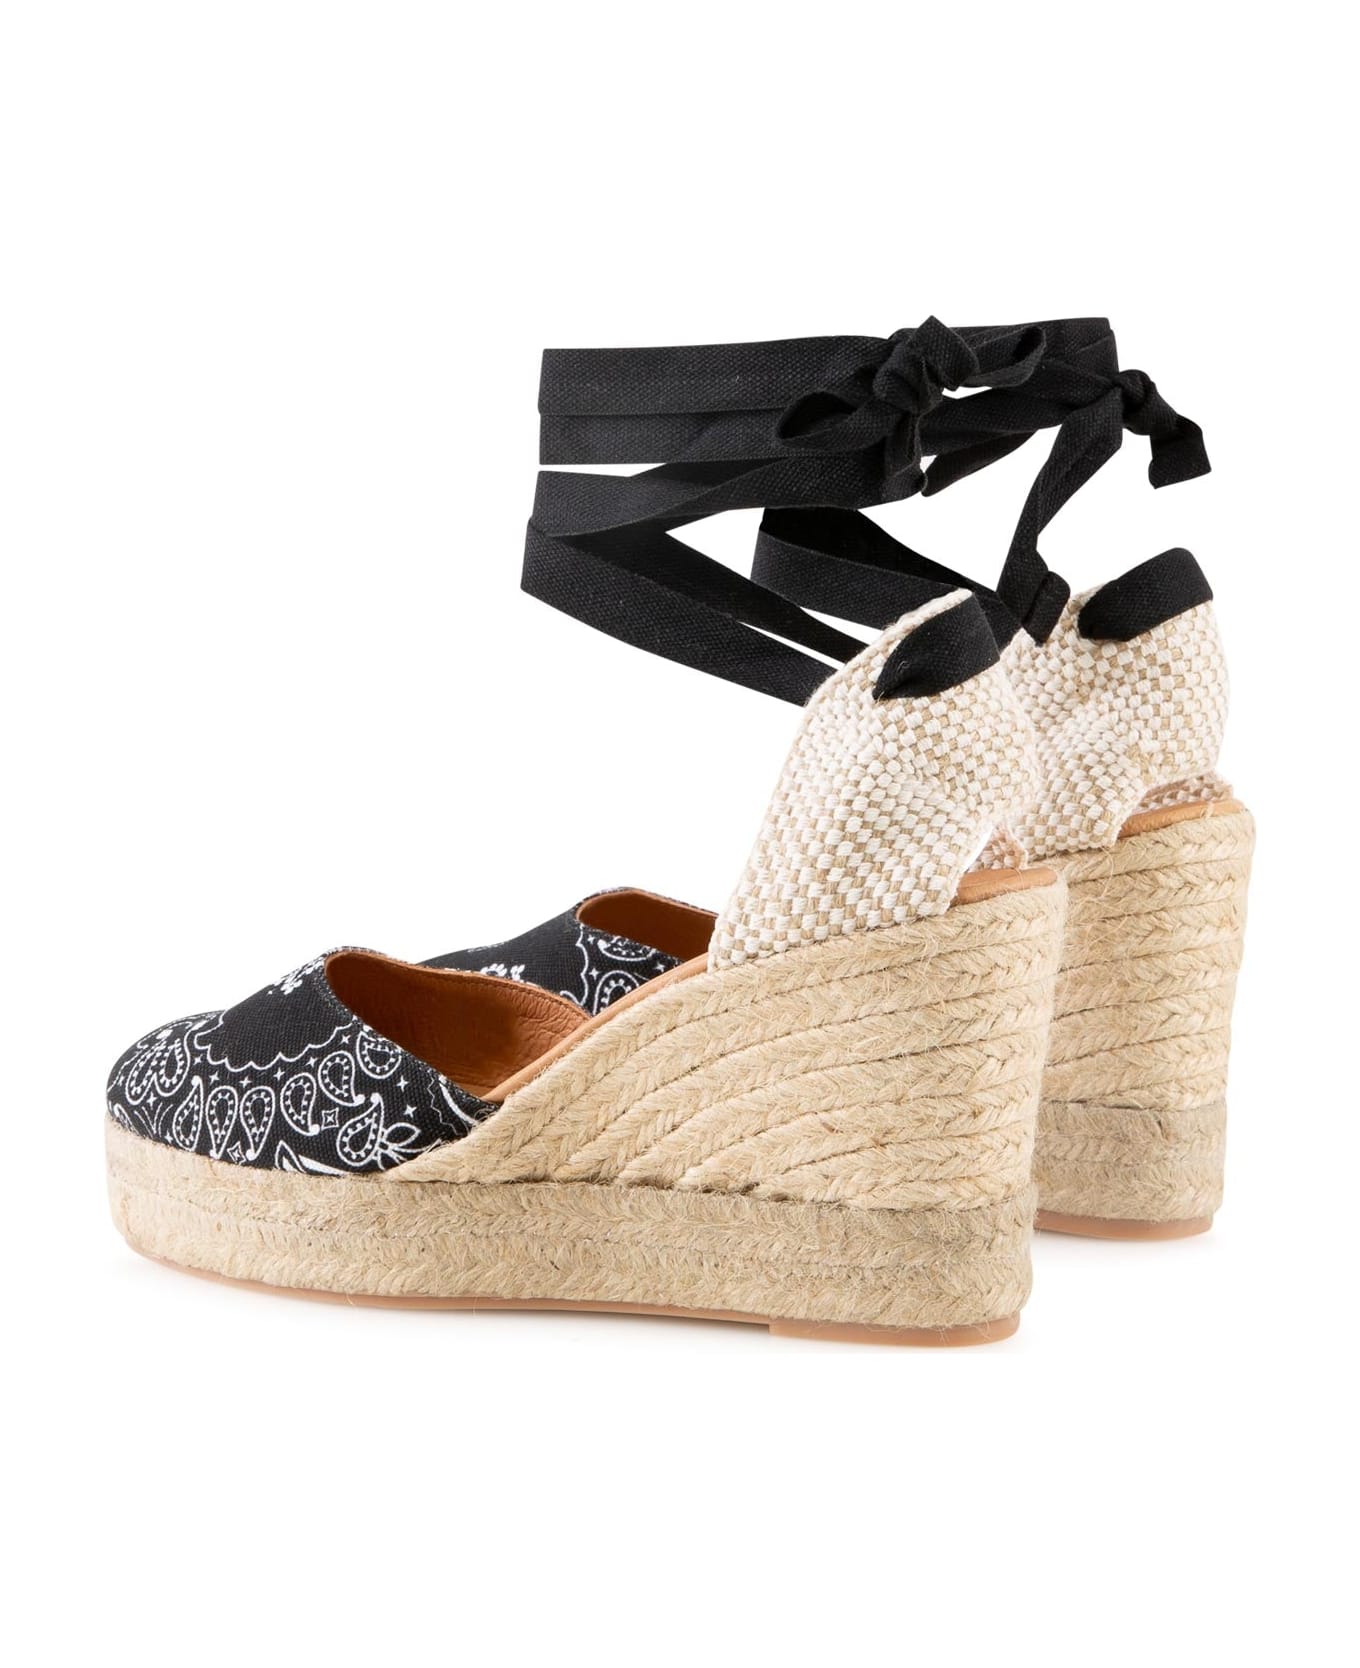 MC2 Saint Barth Espadrillas With High Wedge And Ankle Lace - BLACK ウェッジシューズ